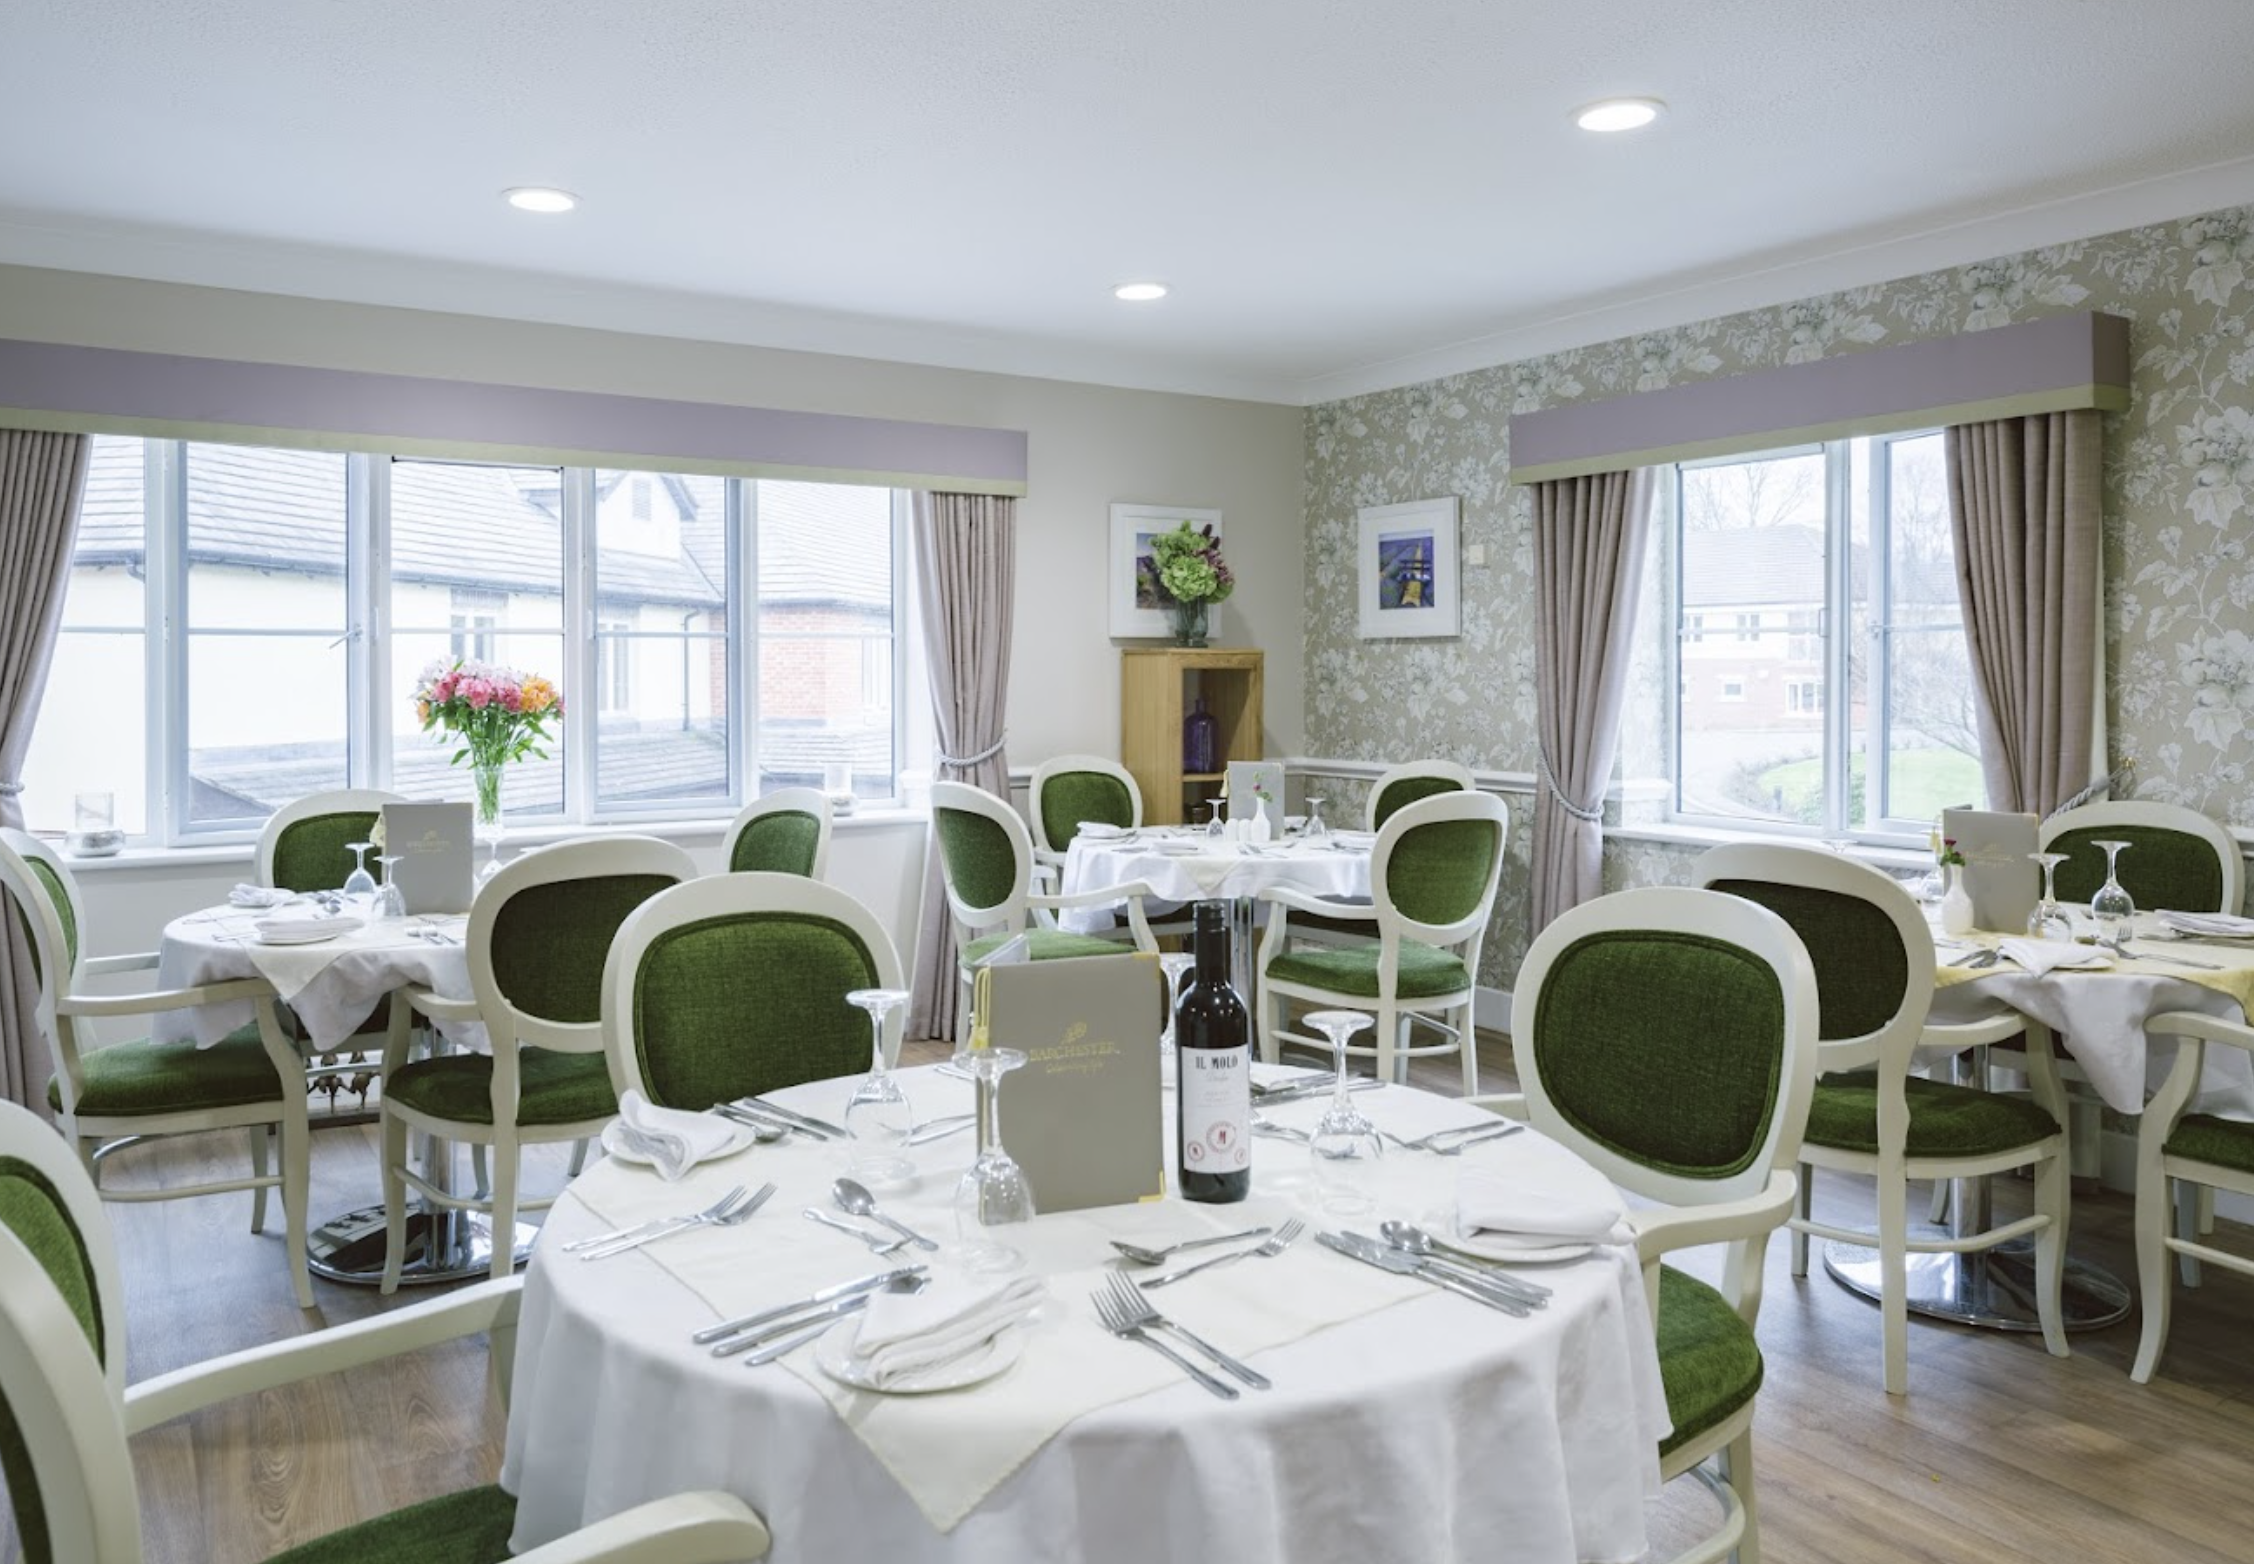 Dining room of The Rhallt care home in Welshpool, Wales